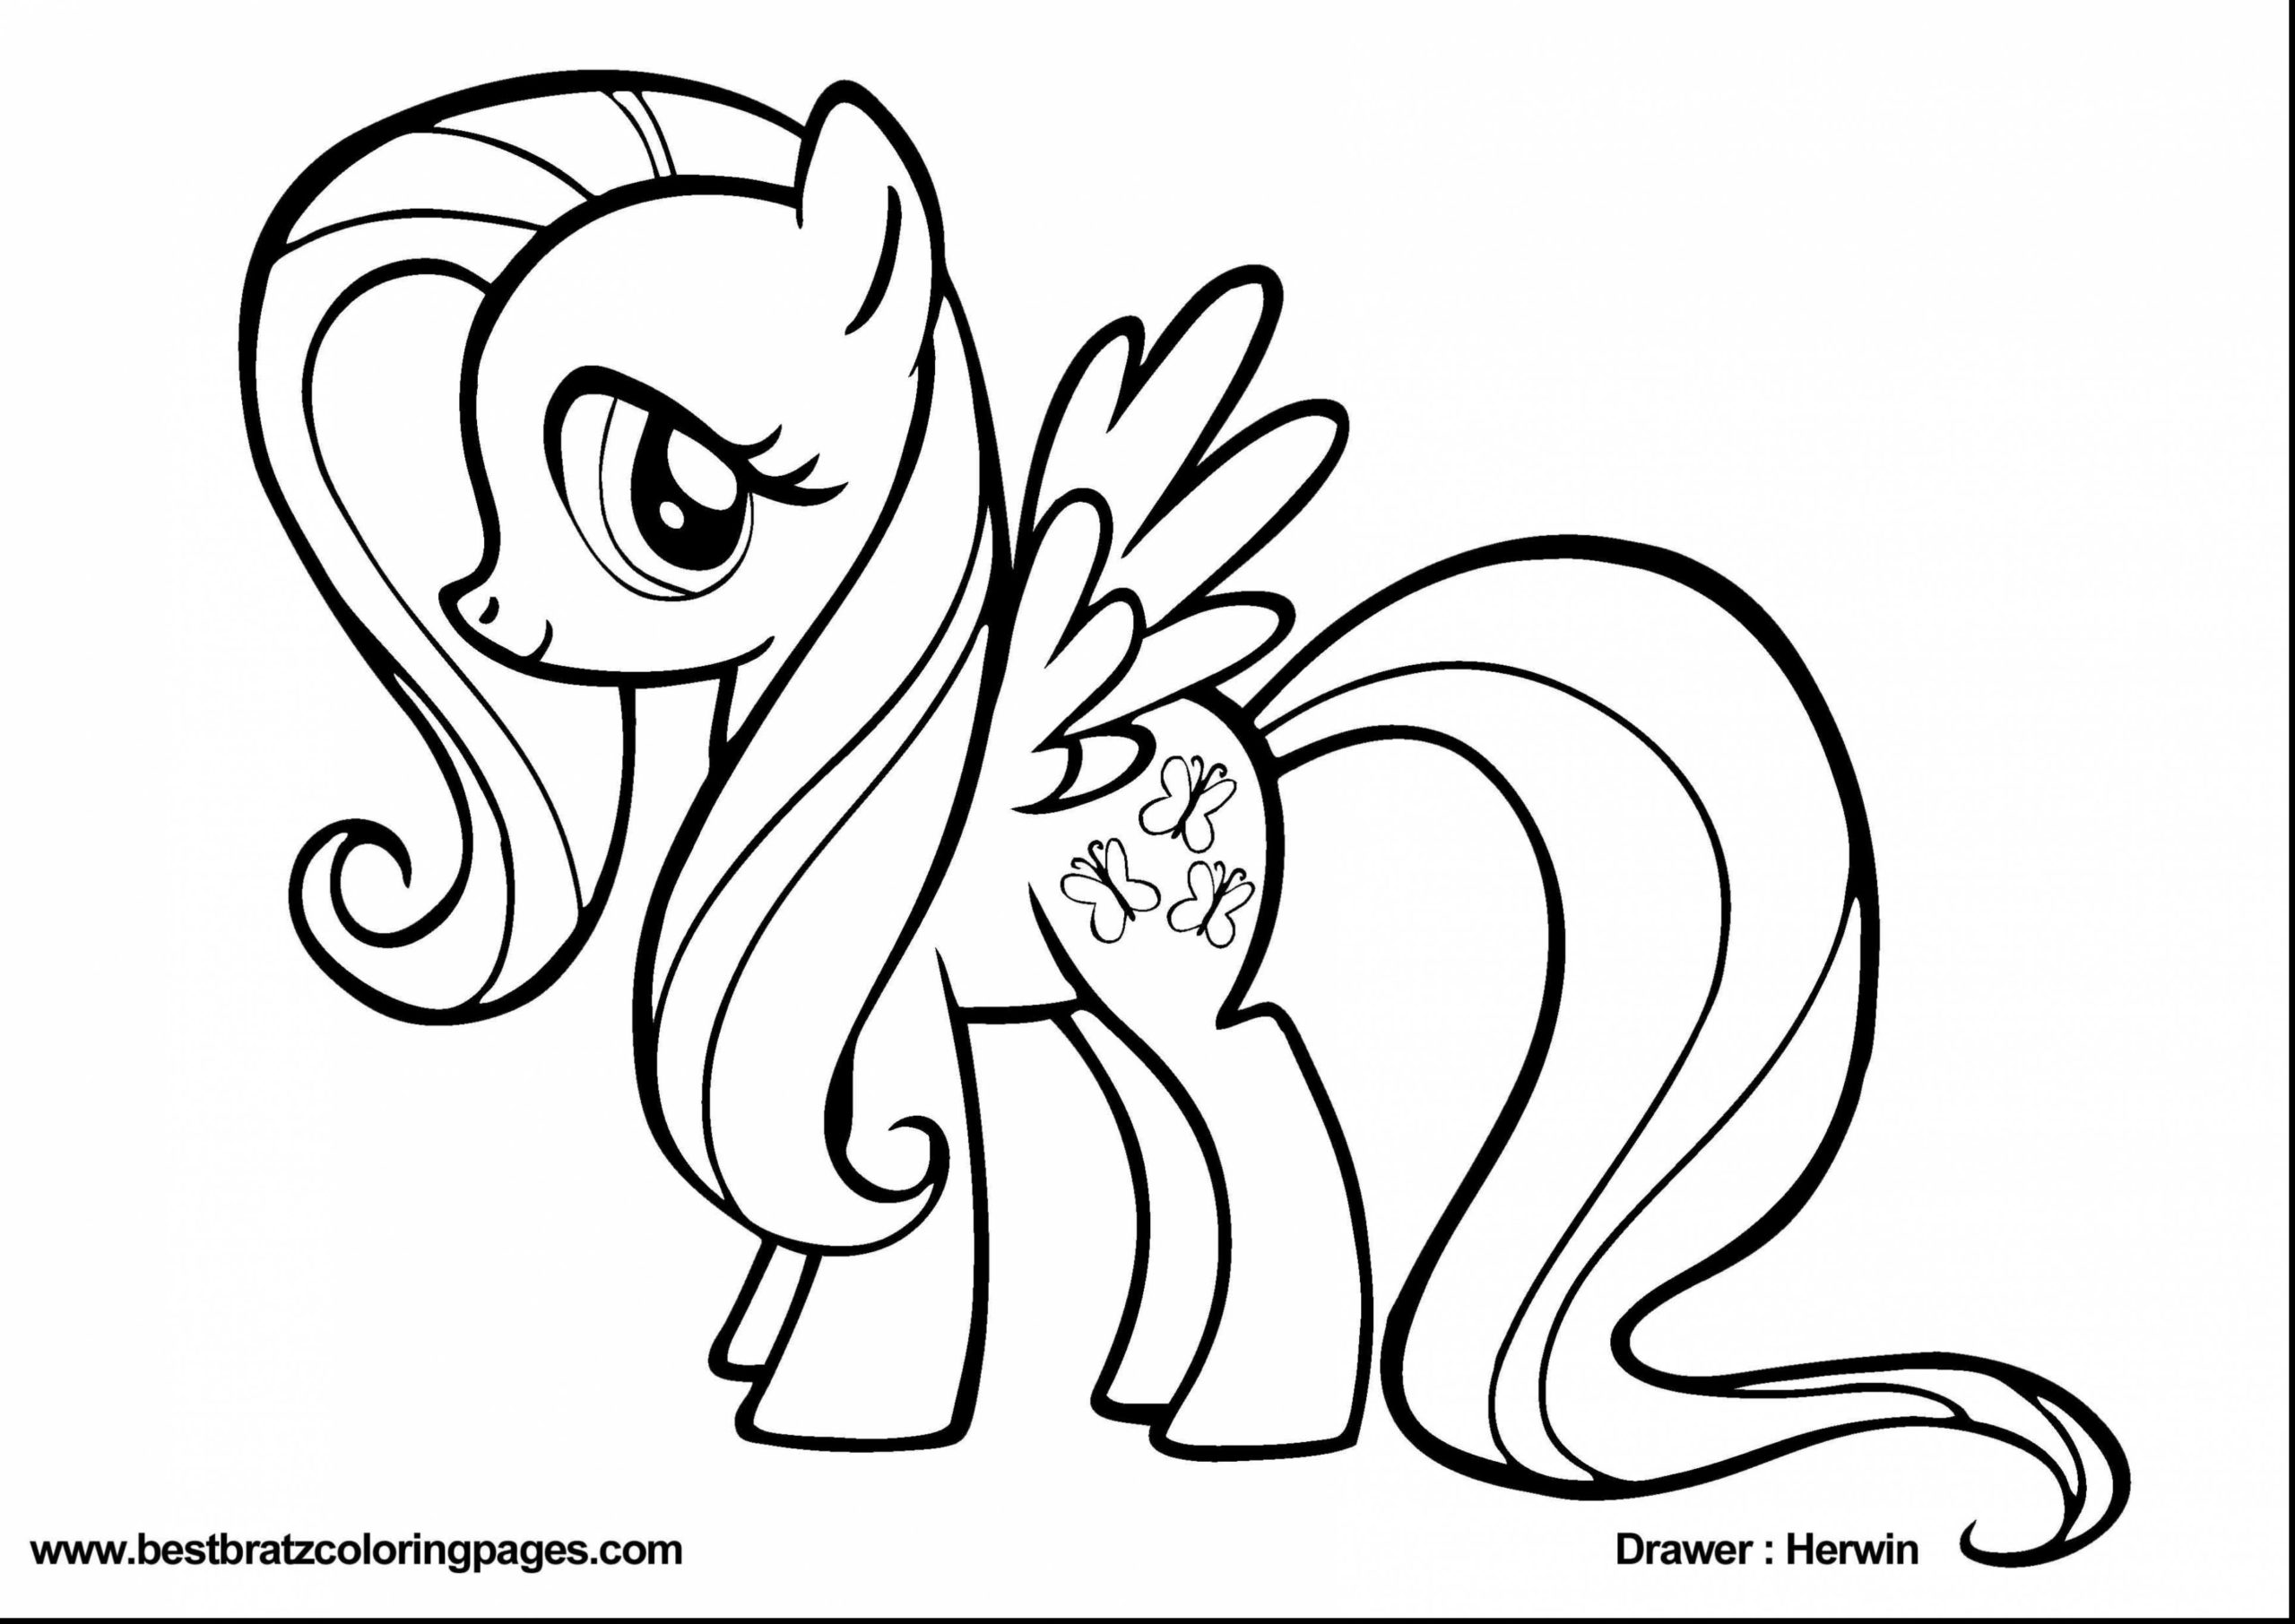 Sunset Shimmer Coloring Pages - Coloring Home